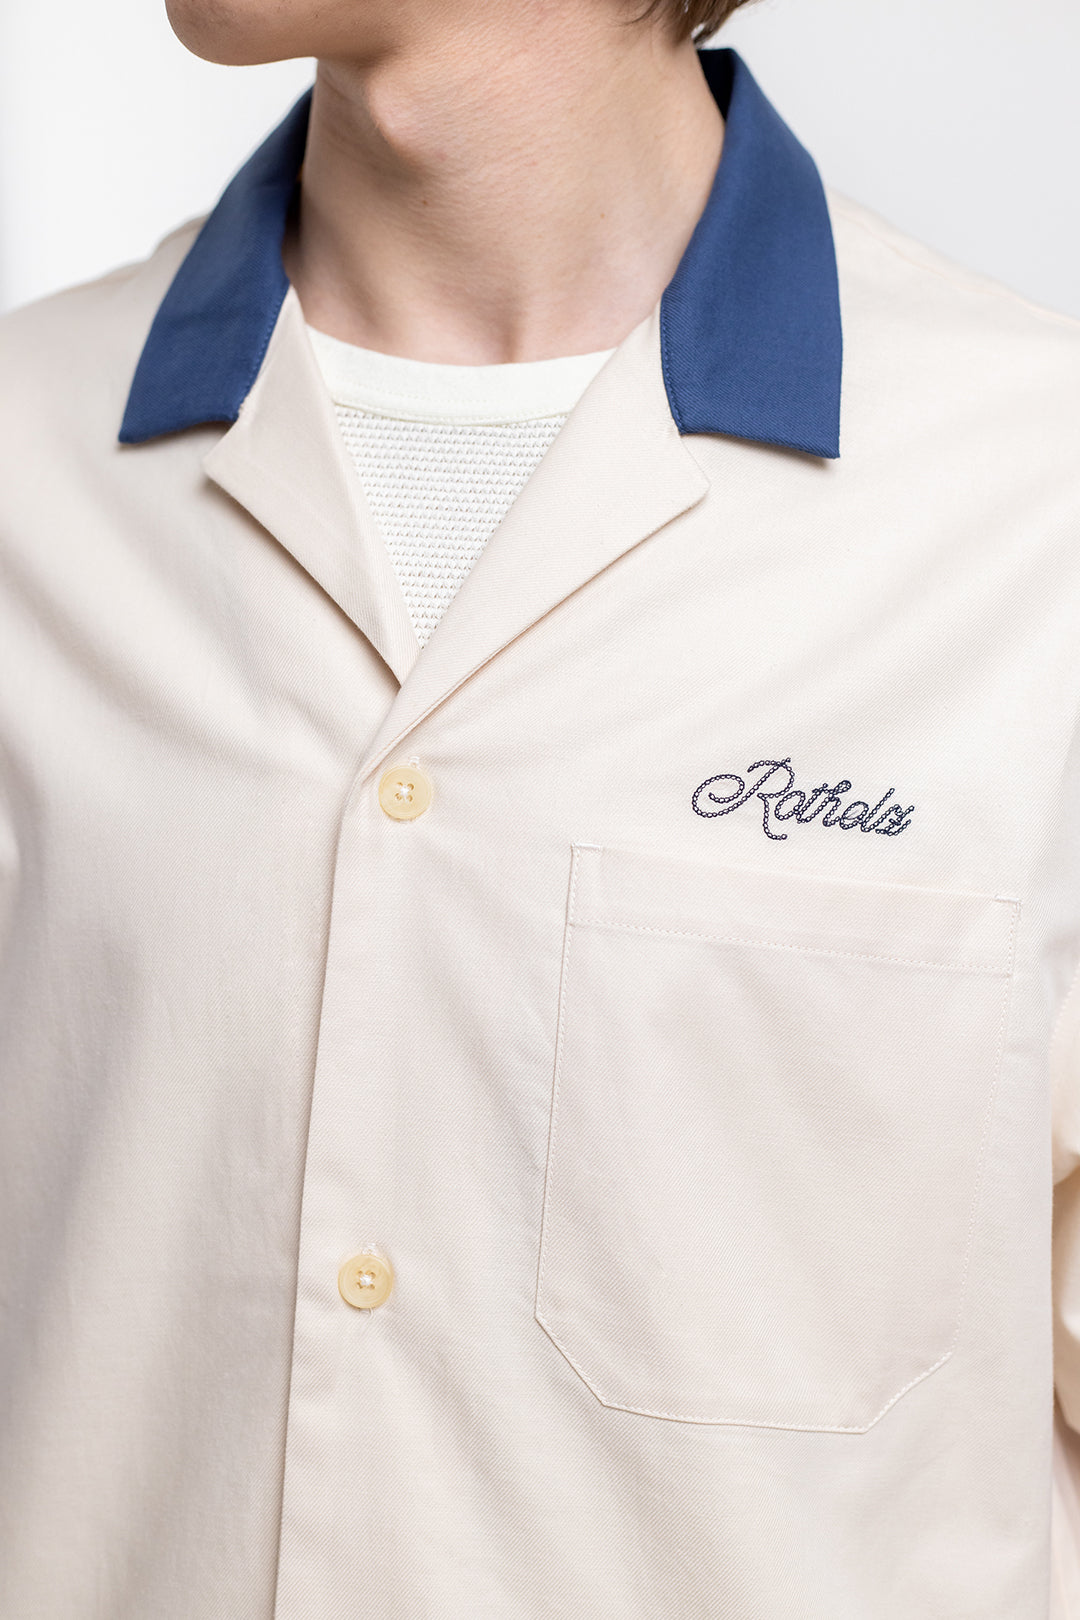 White, short-sleeved bowling shirt made from 100% organic cotton from Rotholz